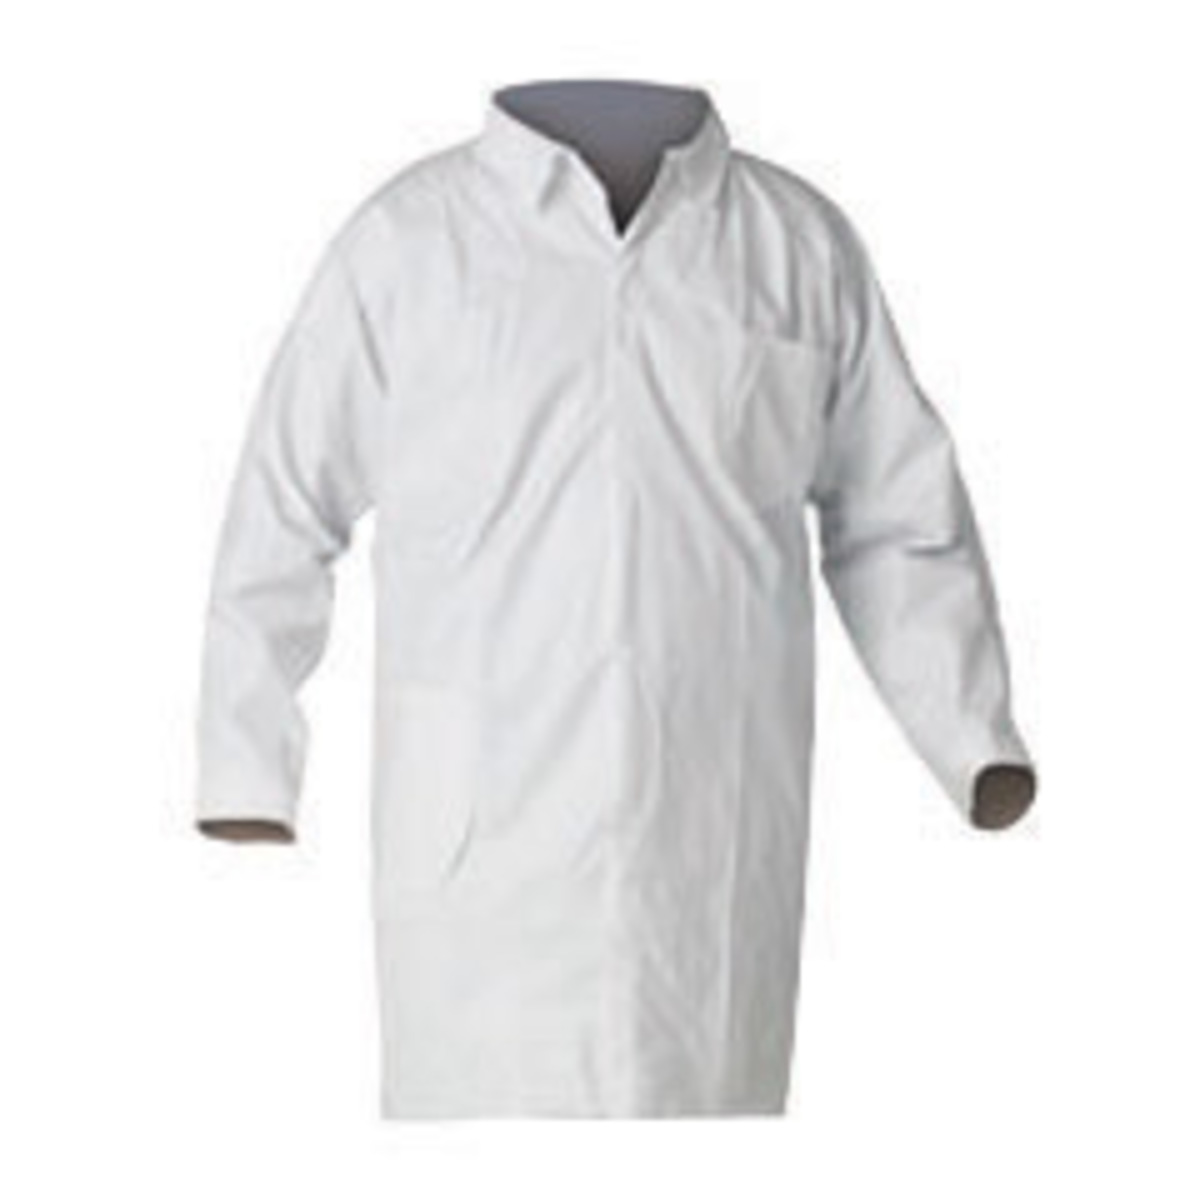 Kimberly-Clark Professional™ 3X White KleenGuard™ A40 Film Laminate Disposable Lab Coat (Availability restrictions apply.)